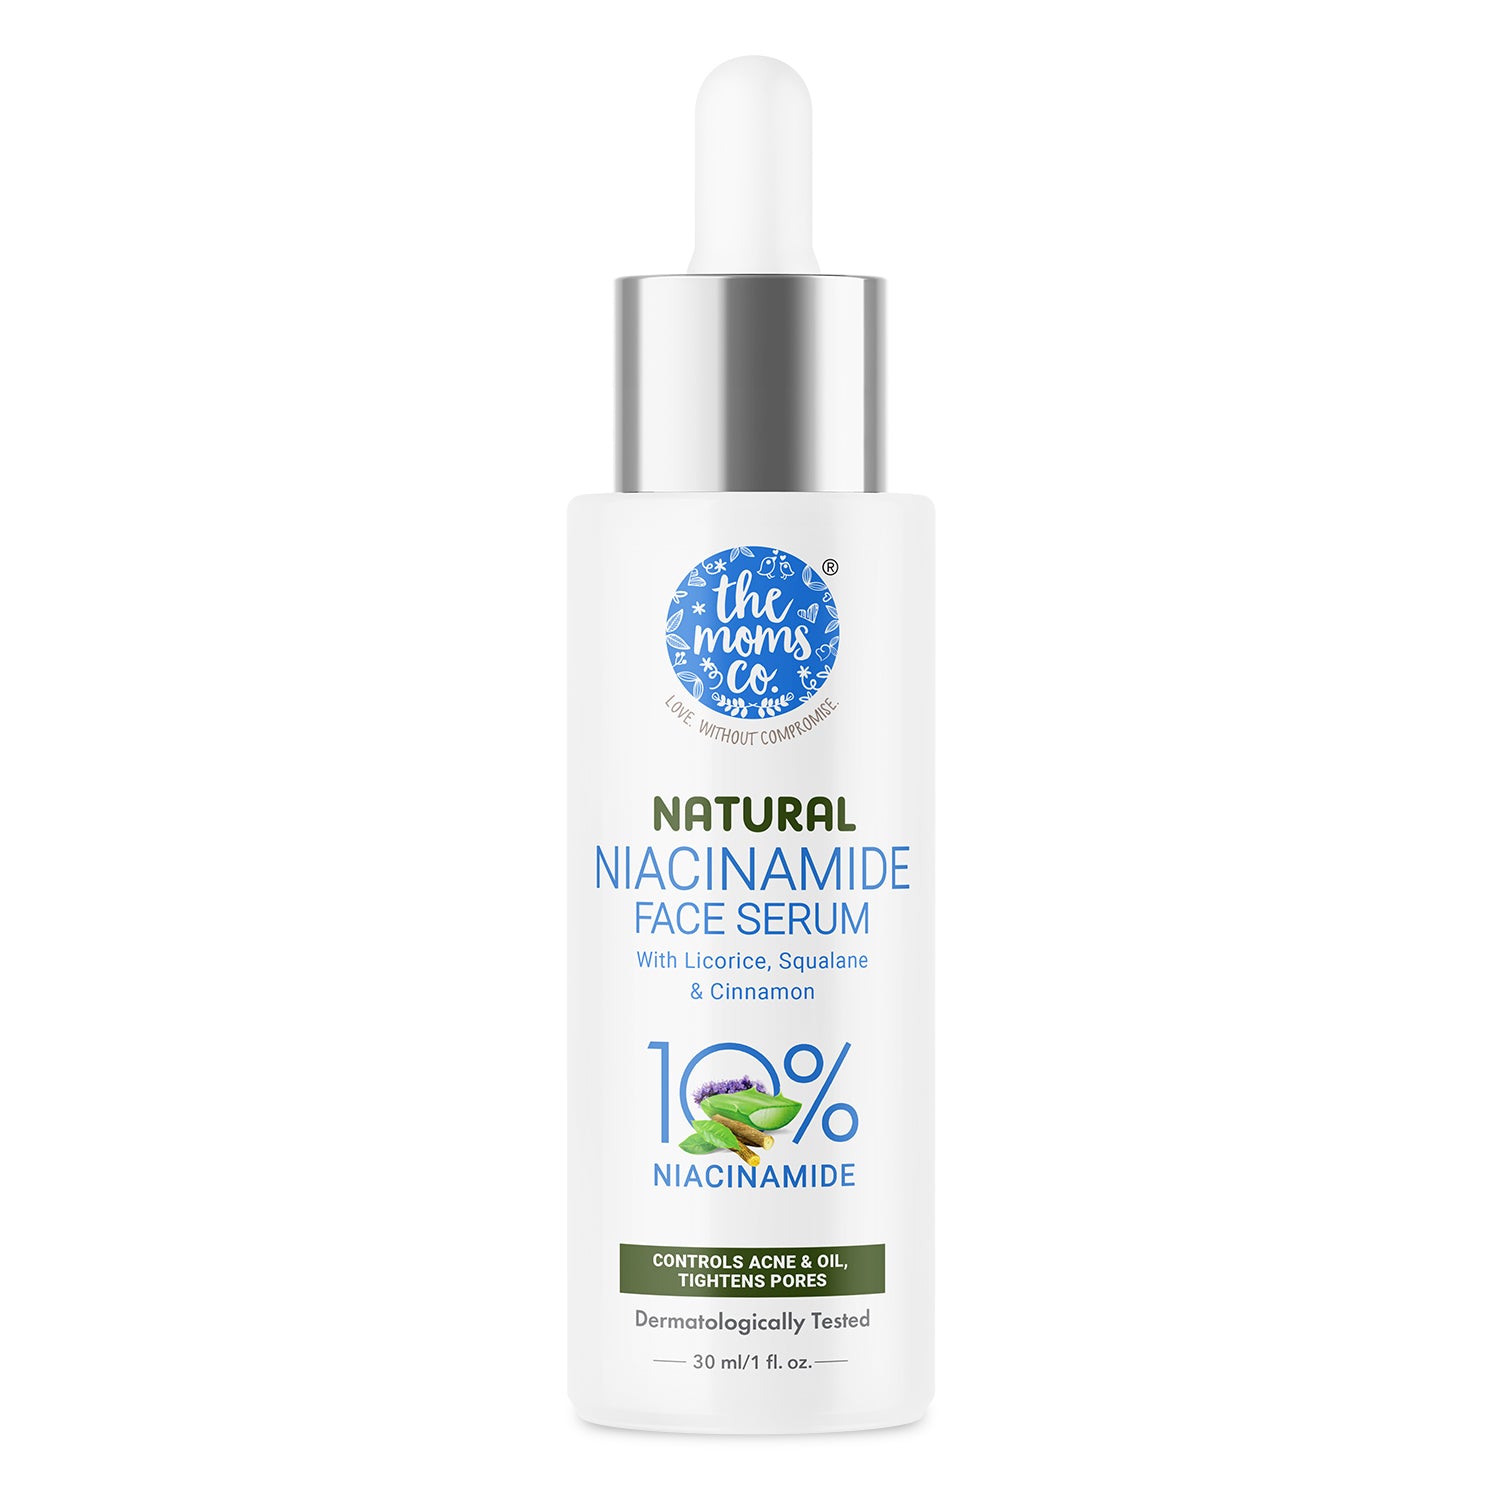 The Moms Co. Natural Niacinamide Face Serum to Reduce Acne Scars, Excess Oil & Pigmentation | With 10% Niacinamide, Licorice & Squalane - 30 ml